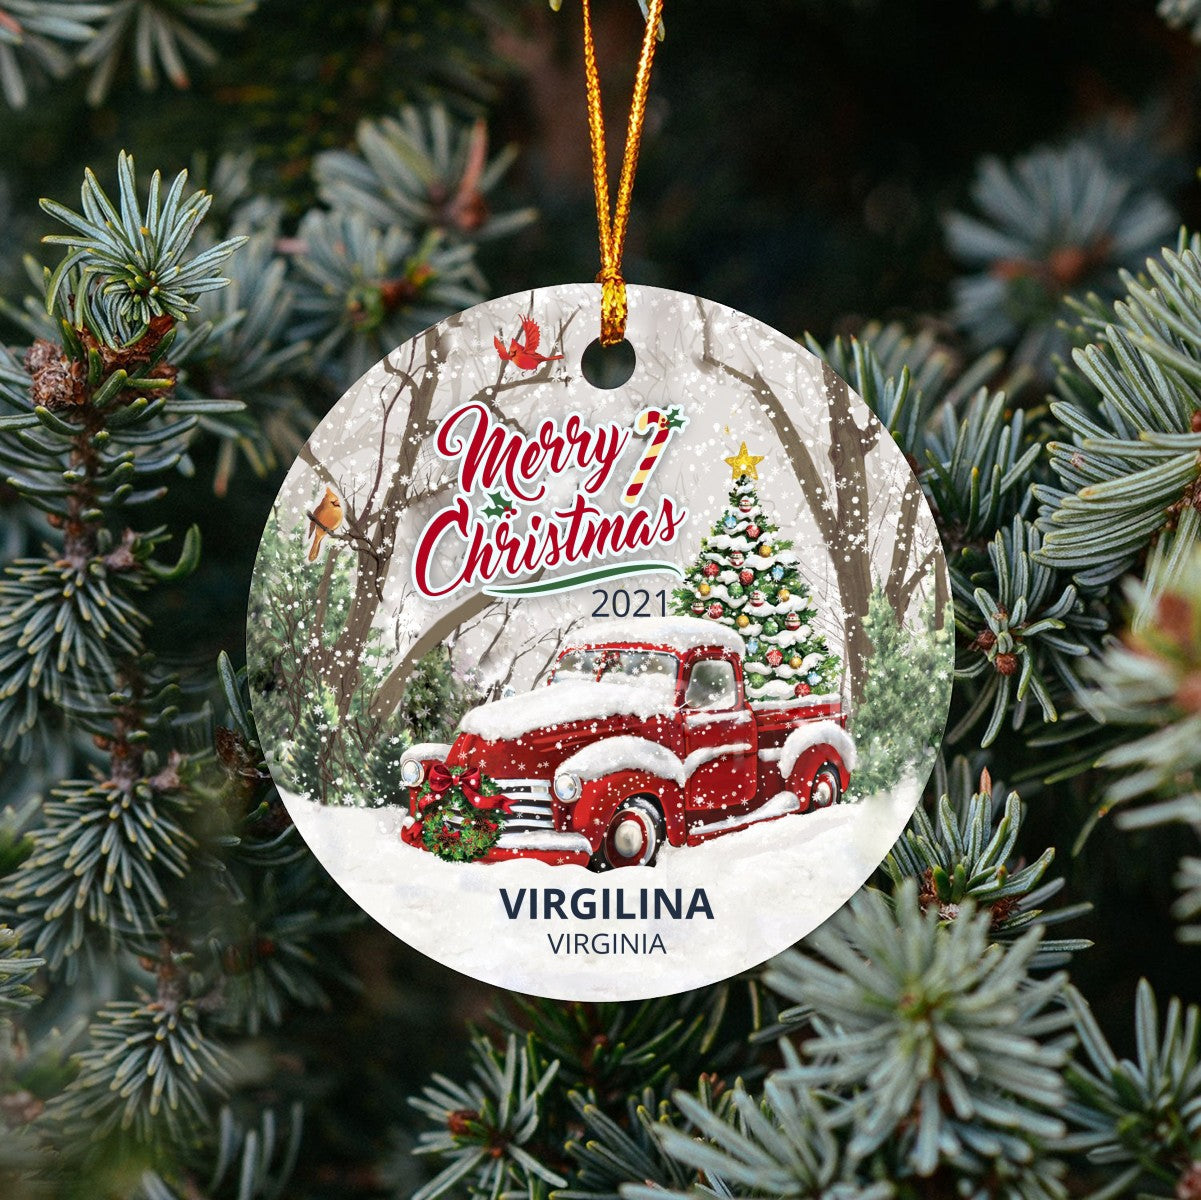 Christmas Tree Ornaments Virgilina - Ornament With Name City, State Virgilina Virginia VA Ornament - Red Truck Xmas Ornaments 3'' Plastic Gift For Family, Friend And Housewarming